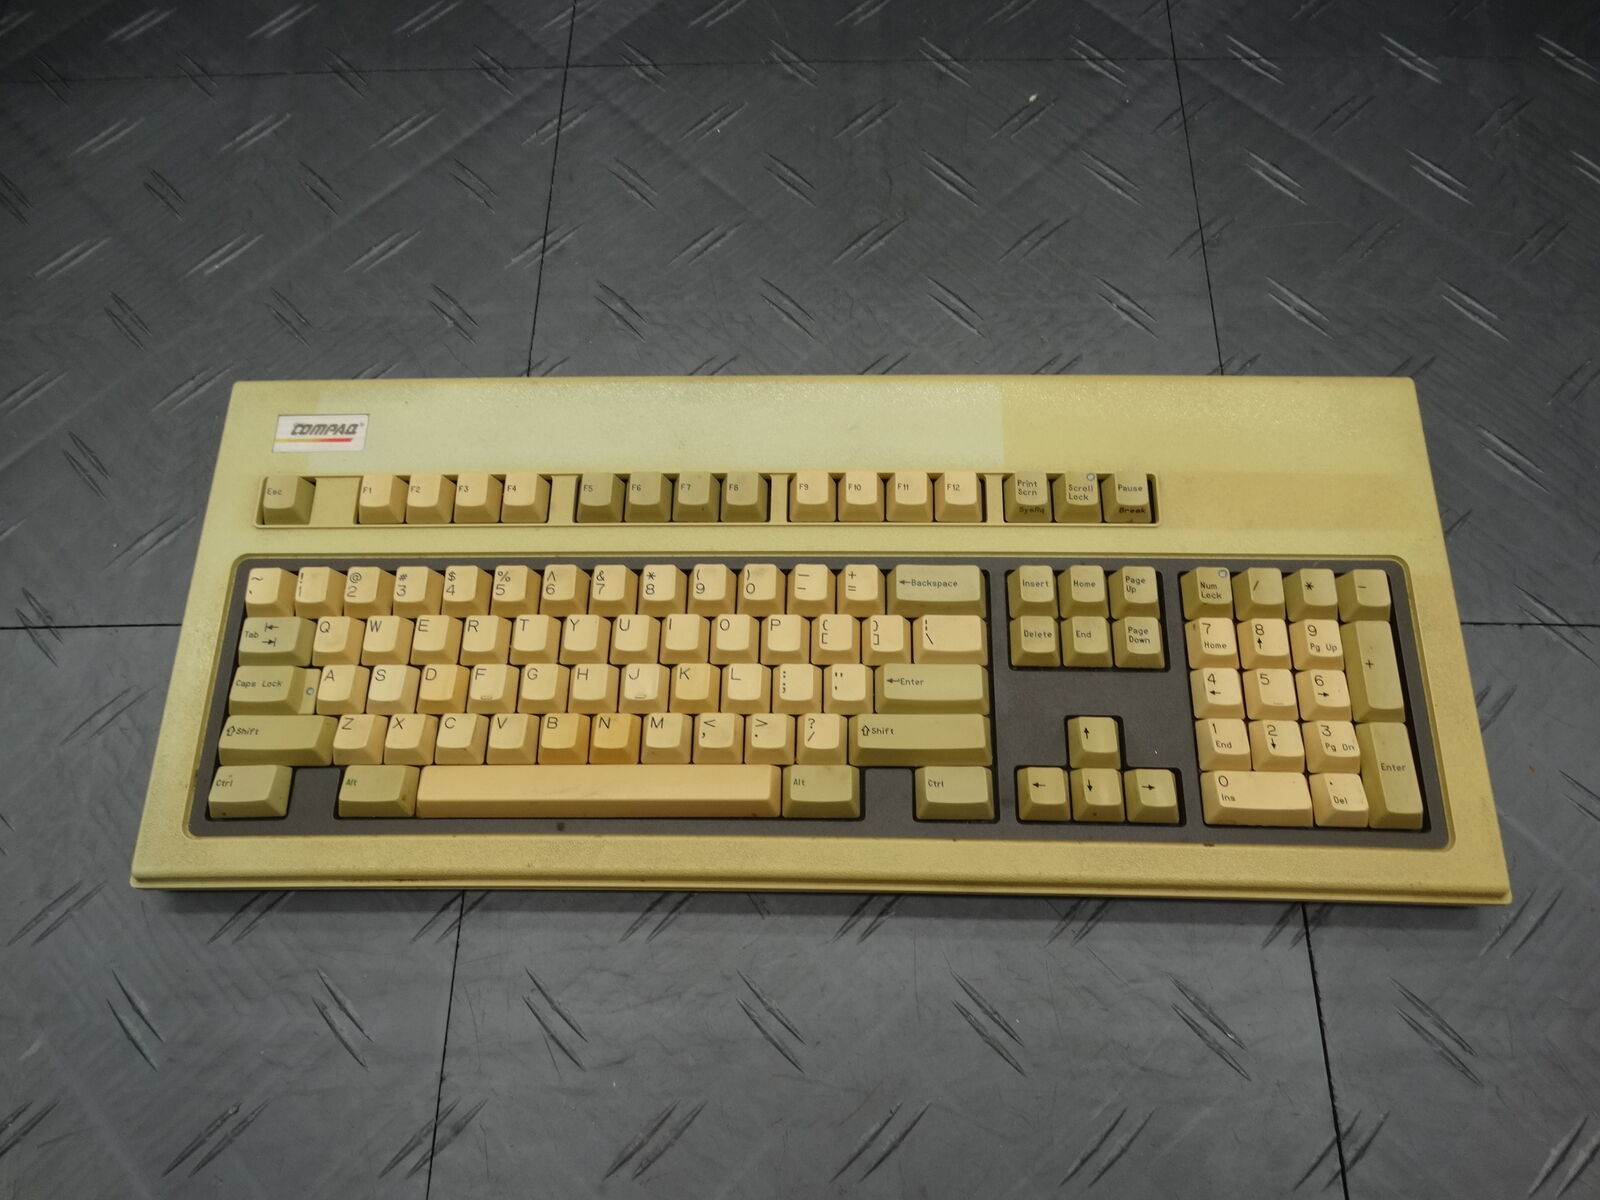 Compaq Mechanical Keyboard Mainframe Collection RT101 XT/AT Connection (02)